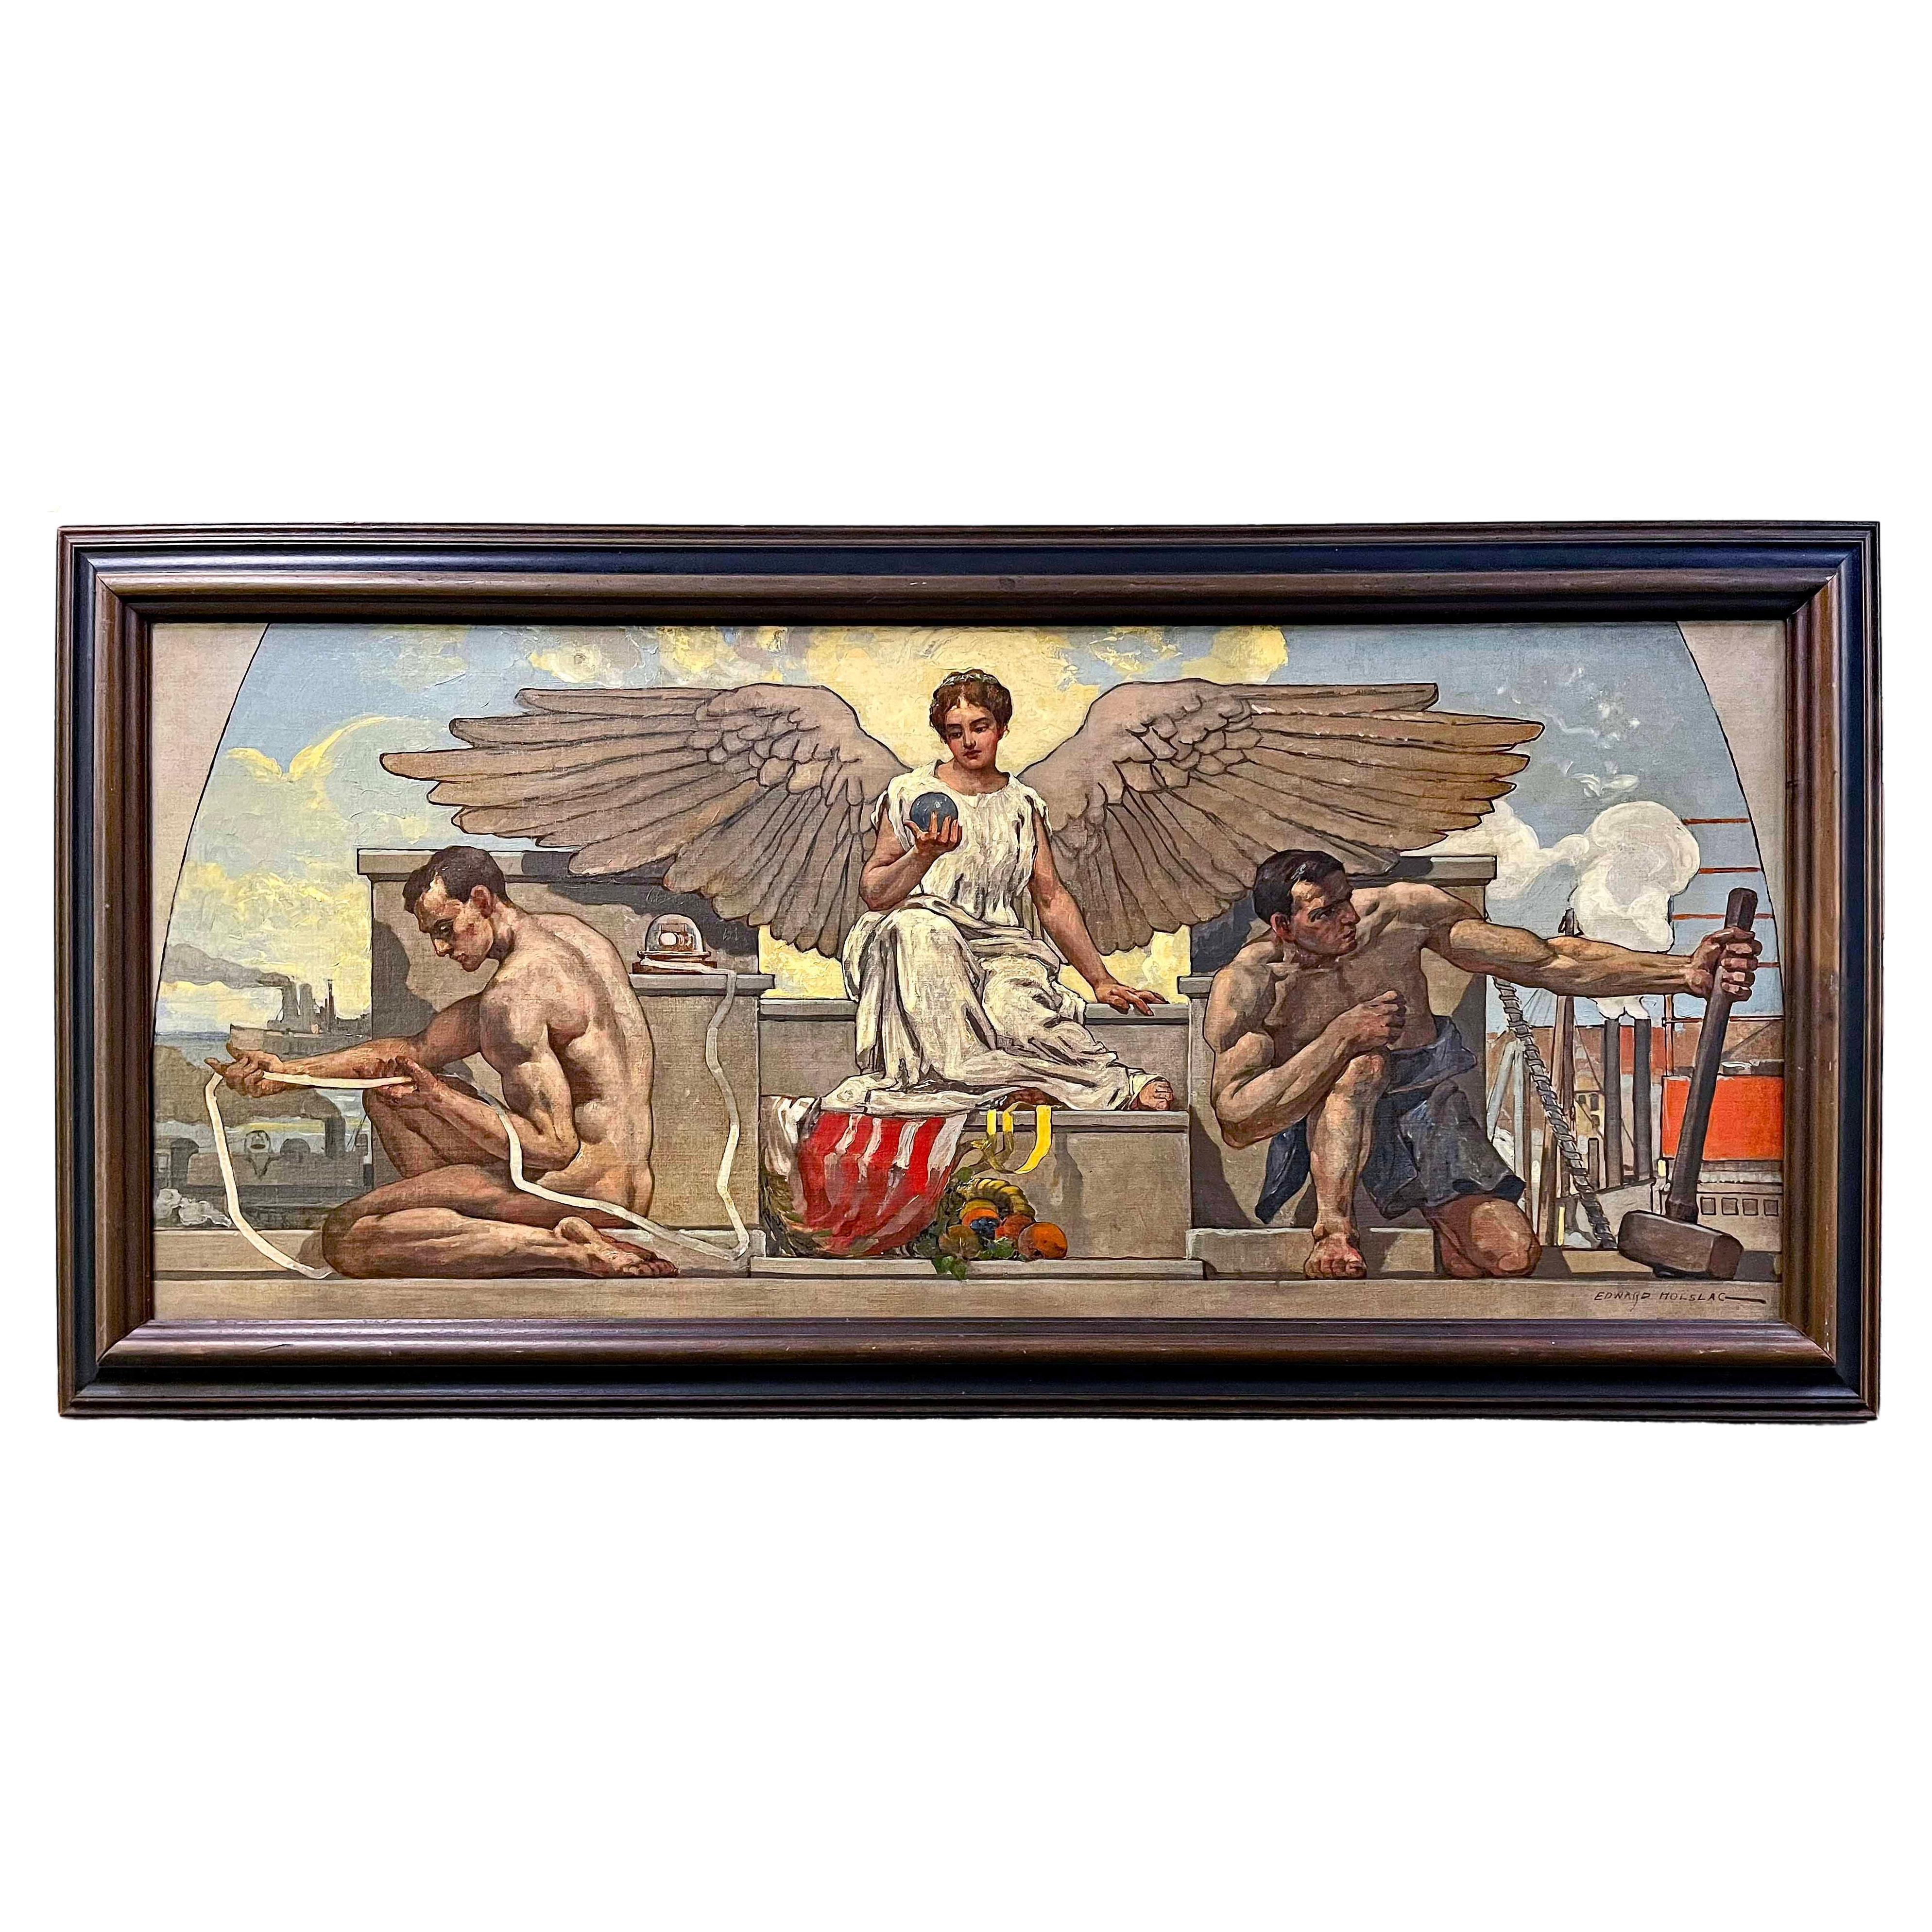 "Commerce and Industry", Beaux Arts/Art Deco Allegorical Mural w/ Male Nudes For Sale